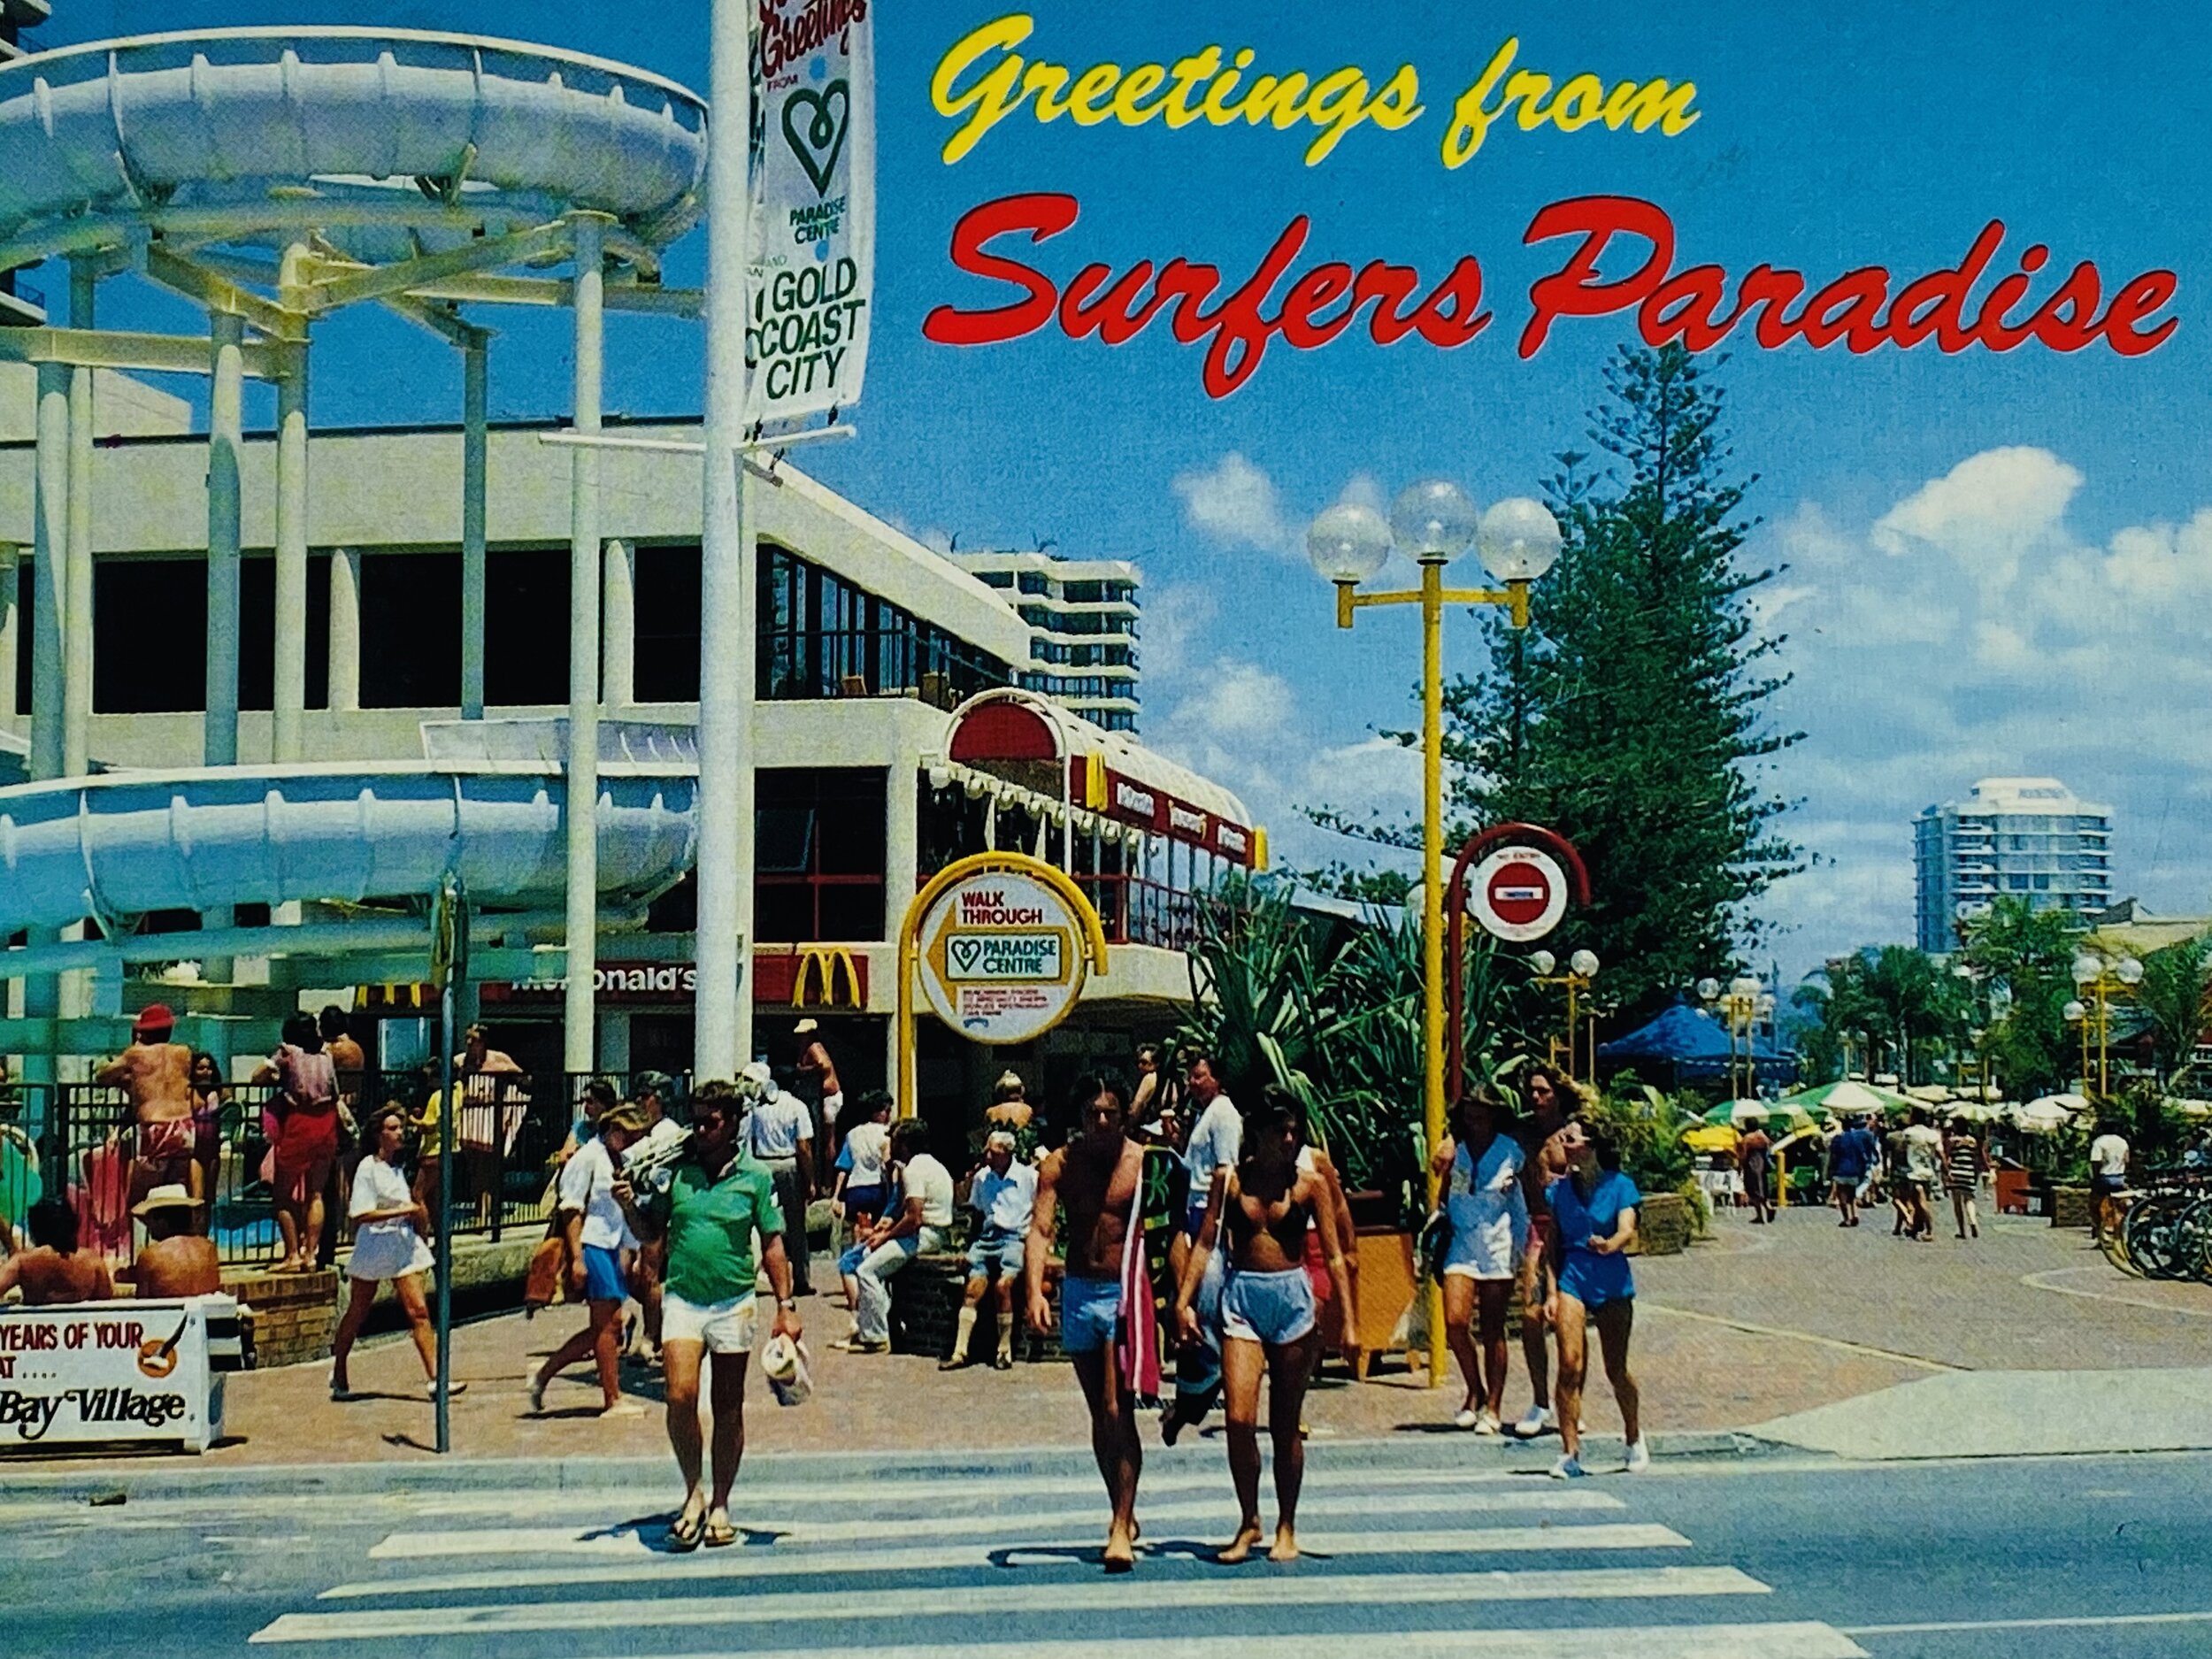 Surfers Paradise Hotel site in 1970 and 2021 : r/GoldCoast